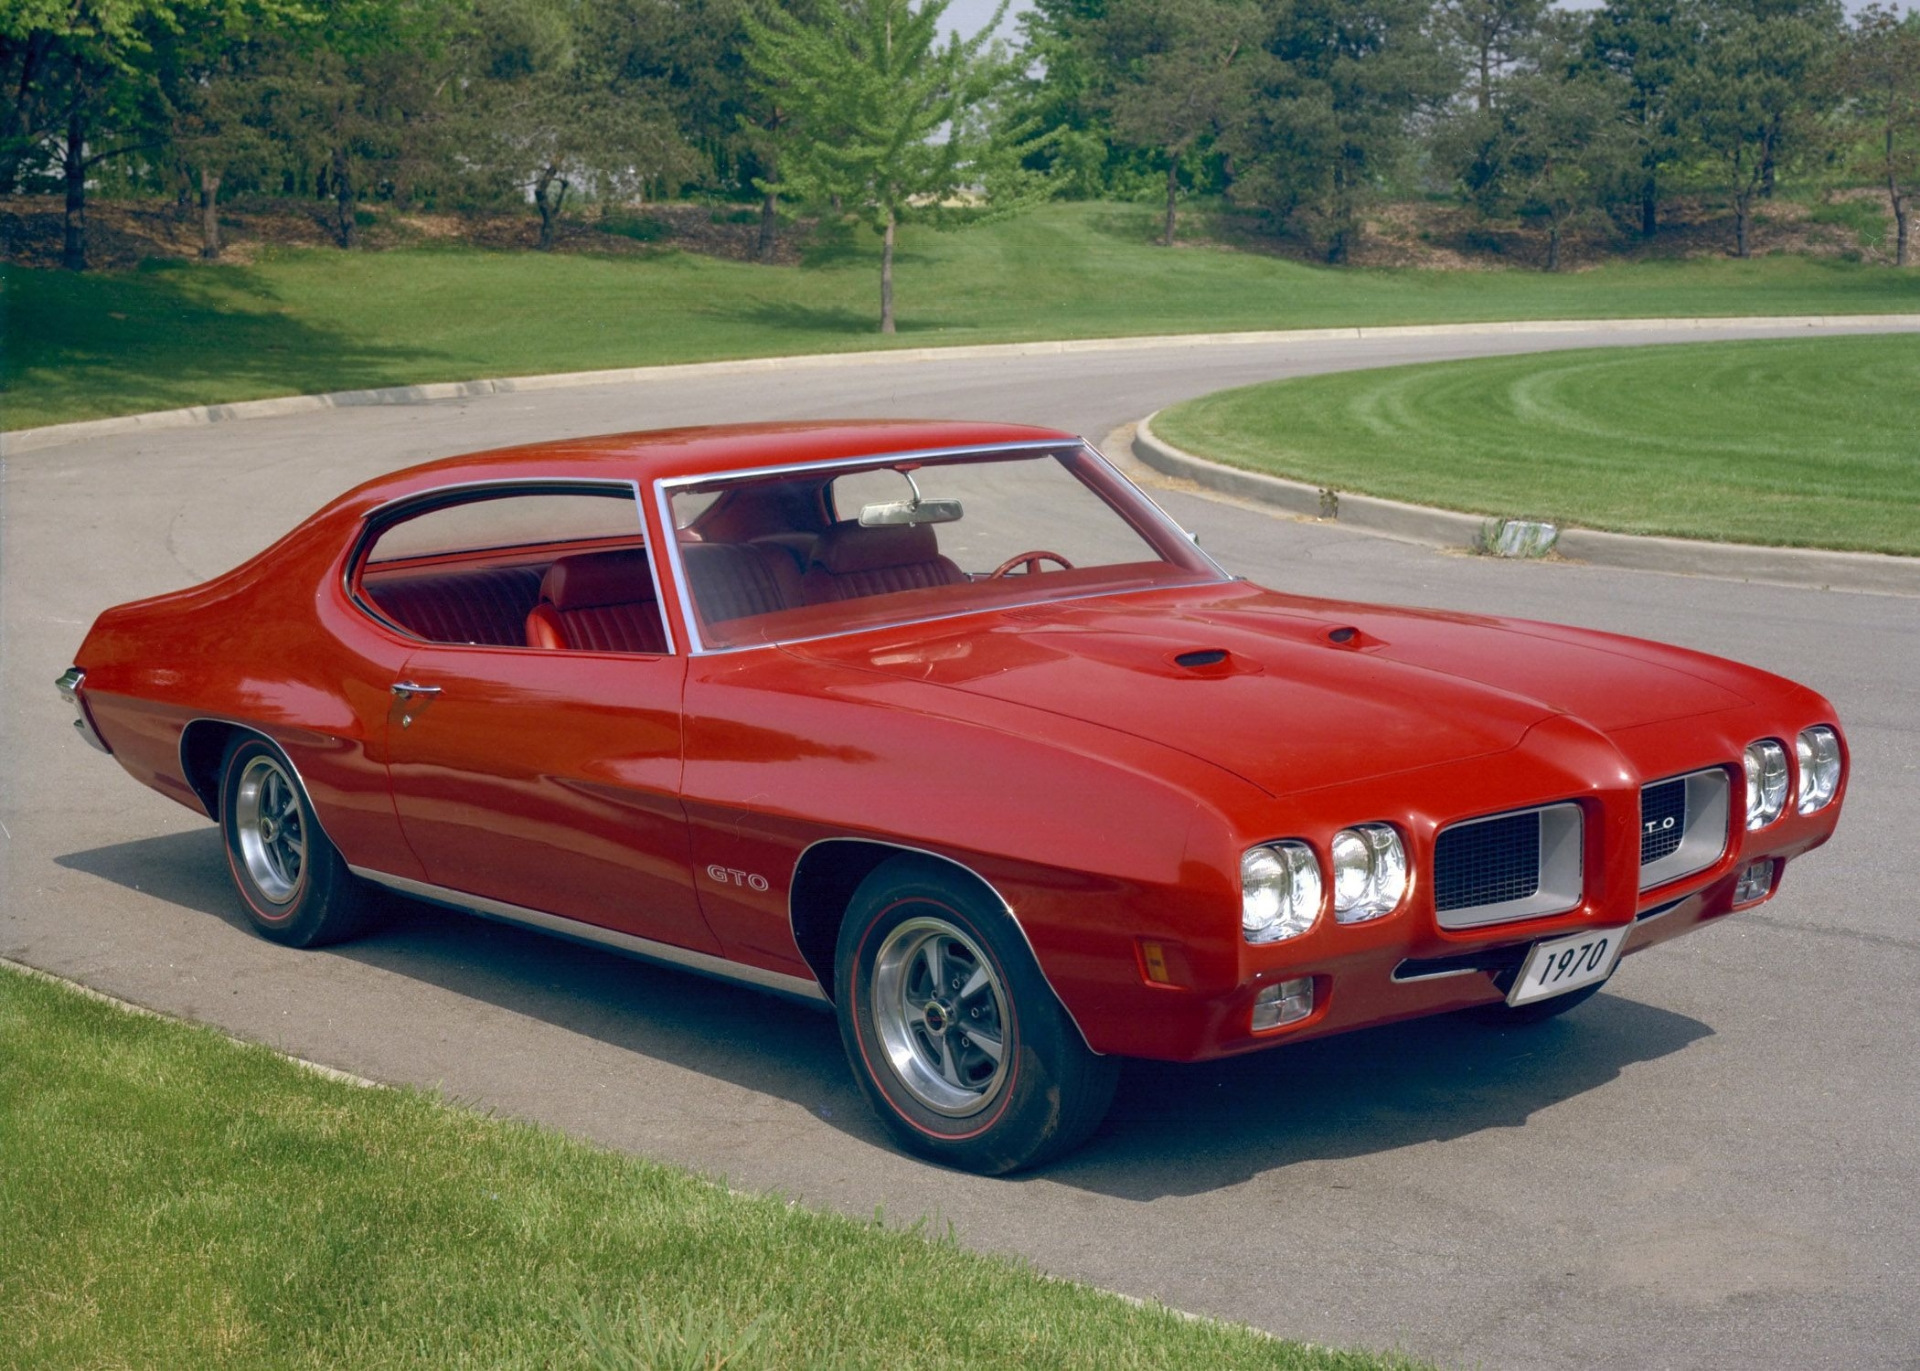 Ford gto 1970